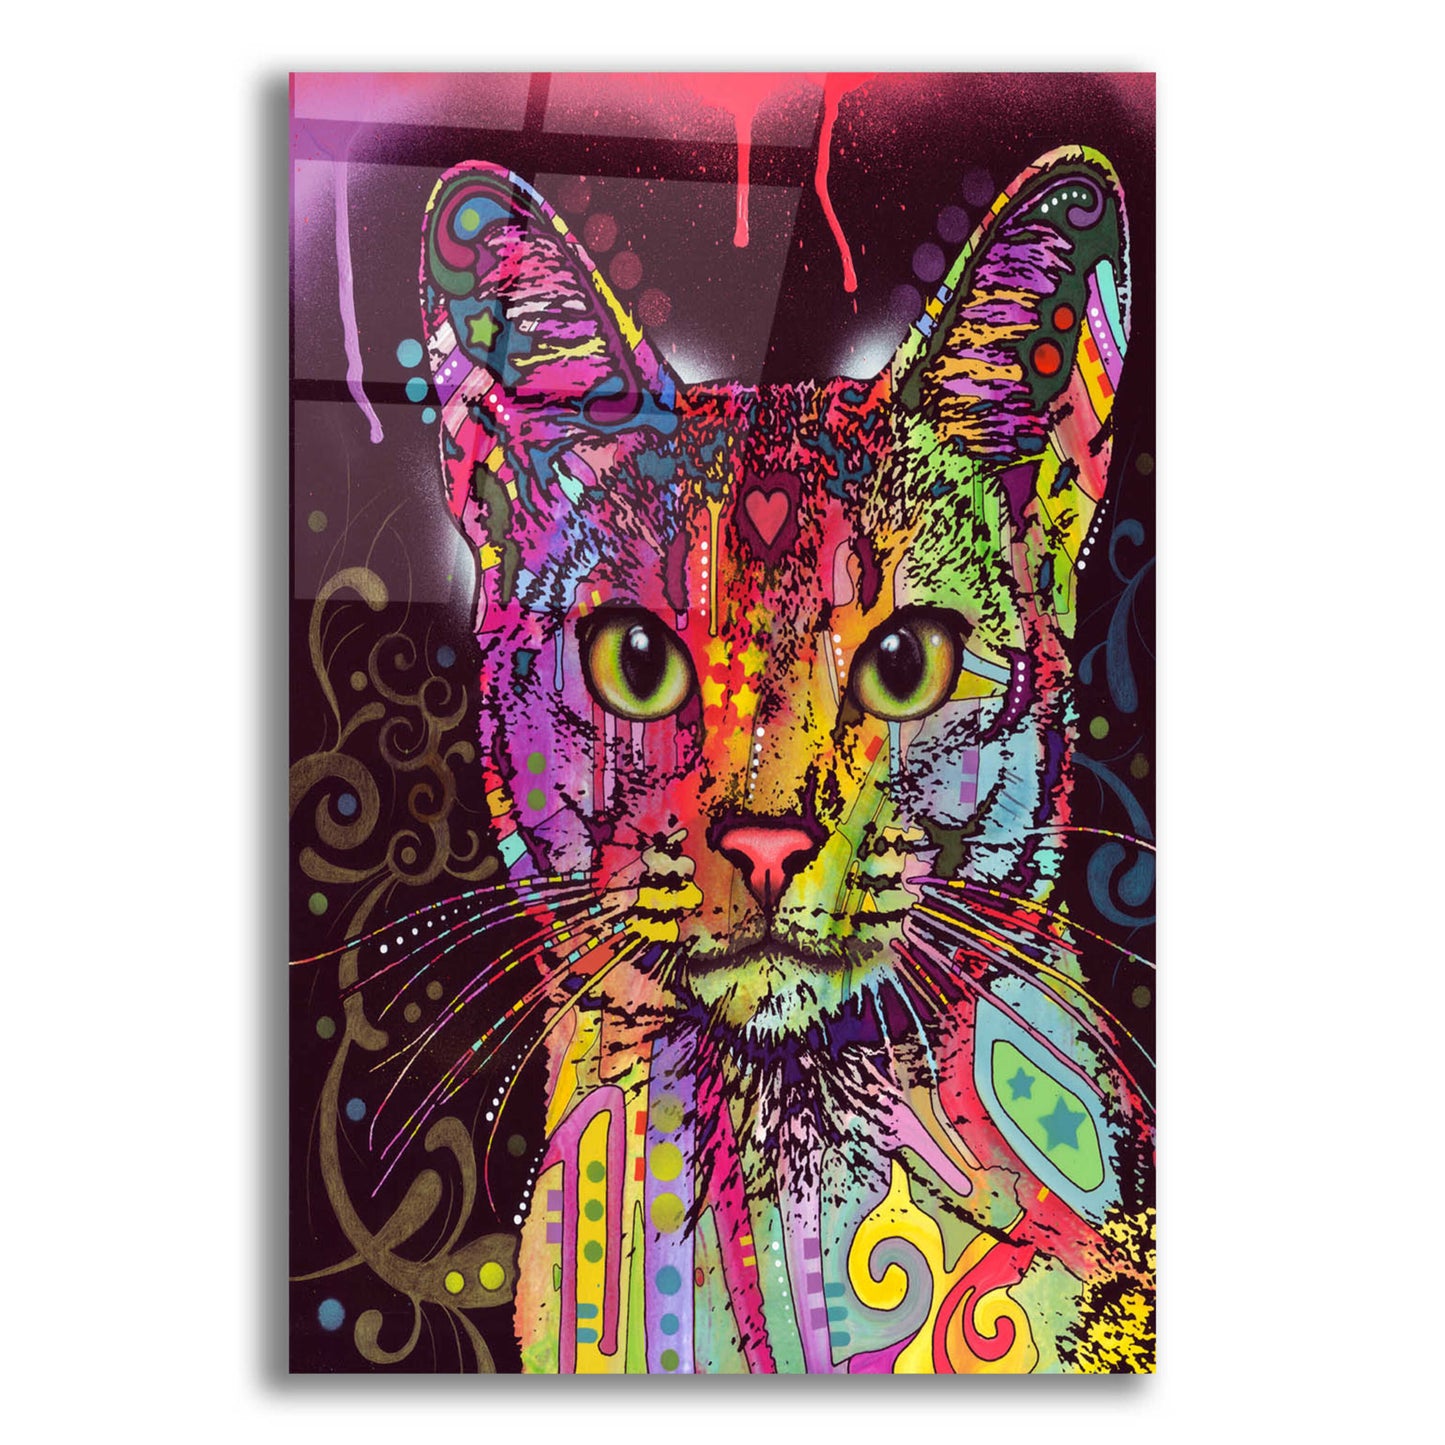 Epic Art 'Abyssinian' by Dean Russo, Acrylic Glass Wall Art,12x16